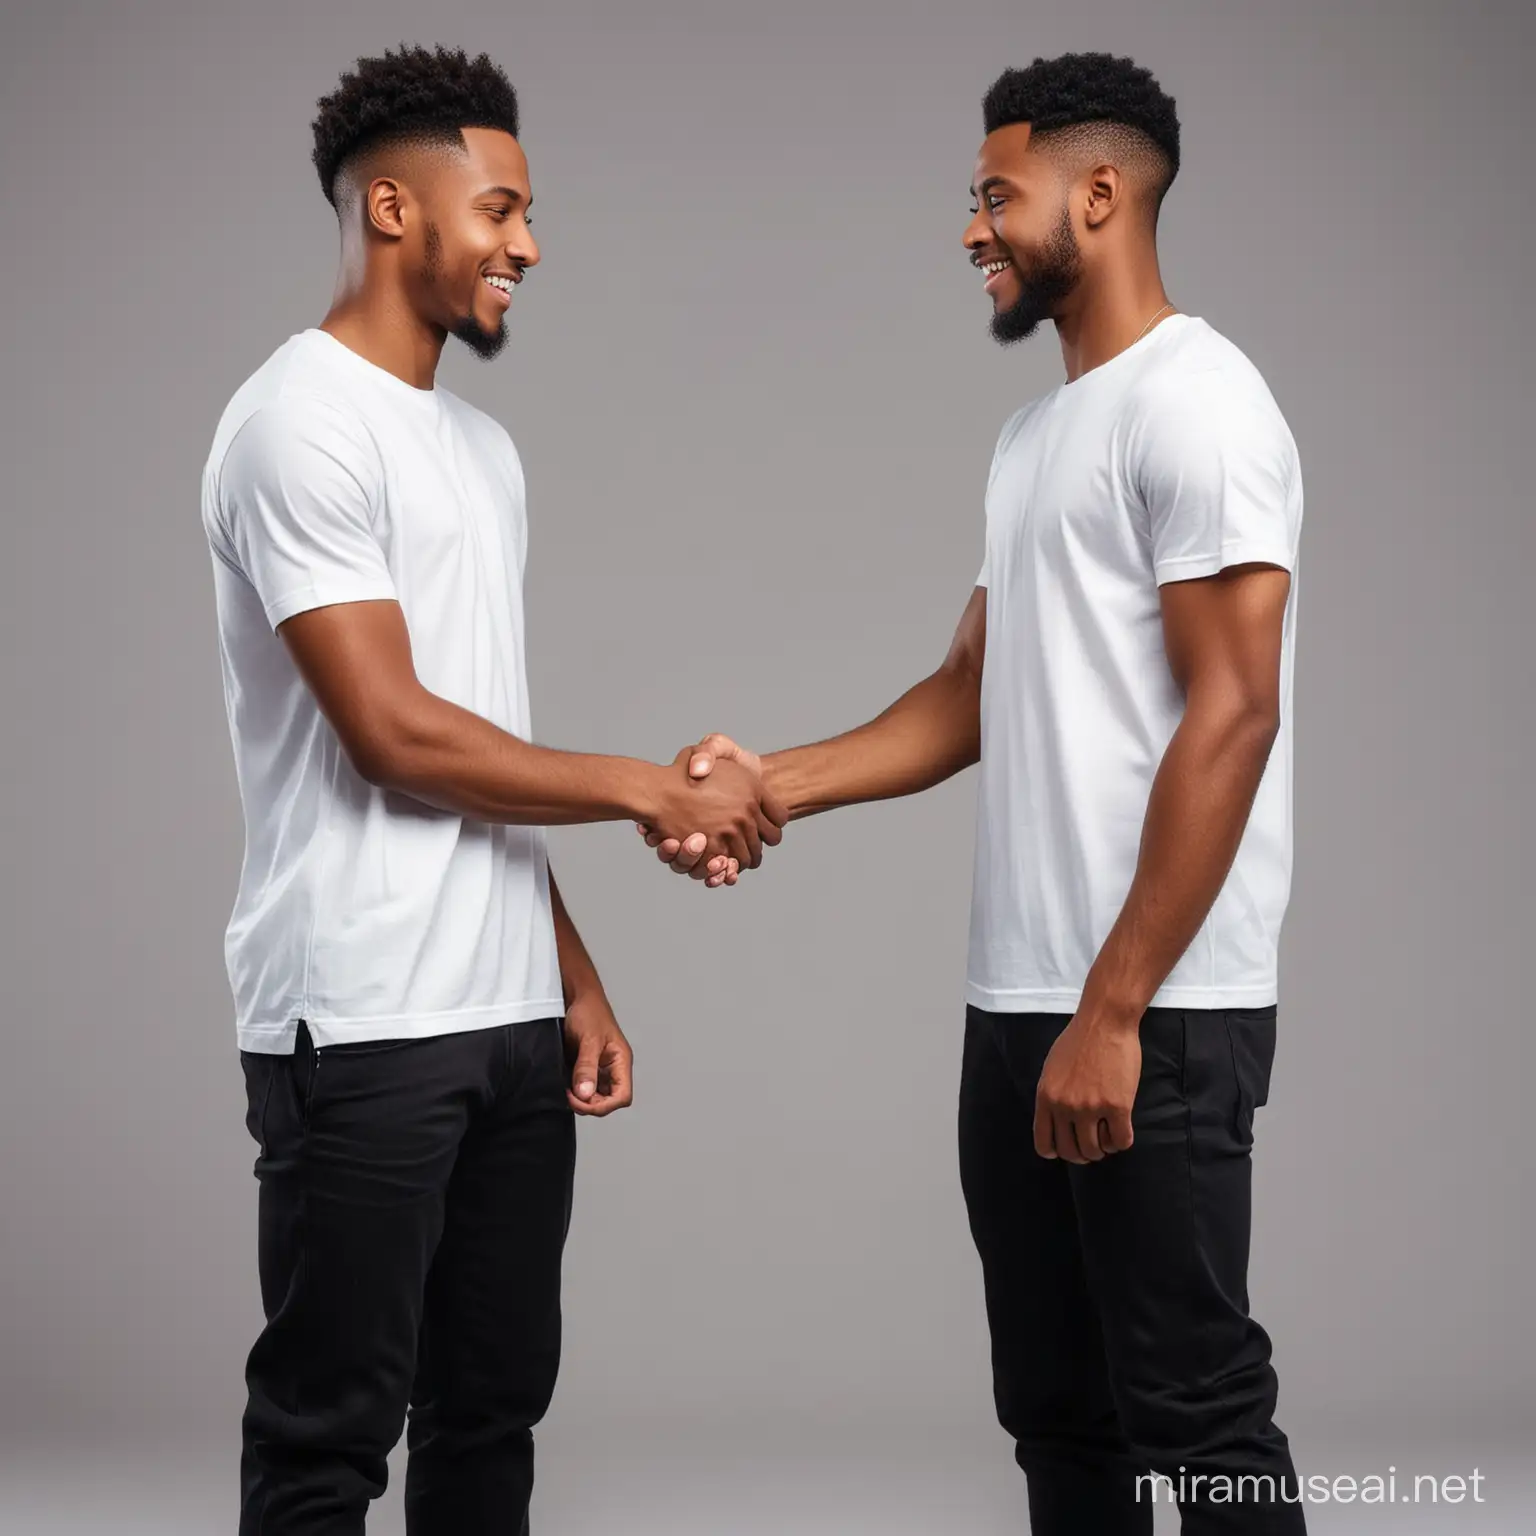 Young African American Men in White TShirts Shaking Hands on Grey Background